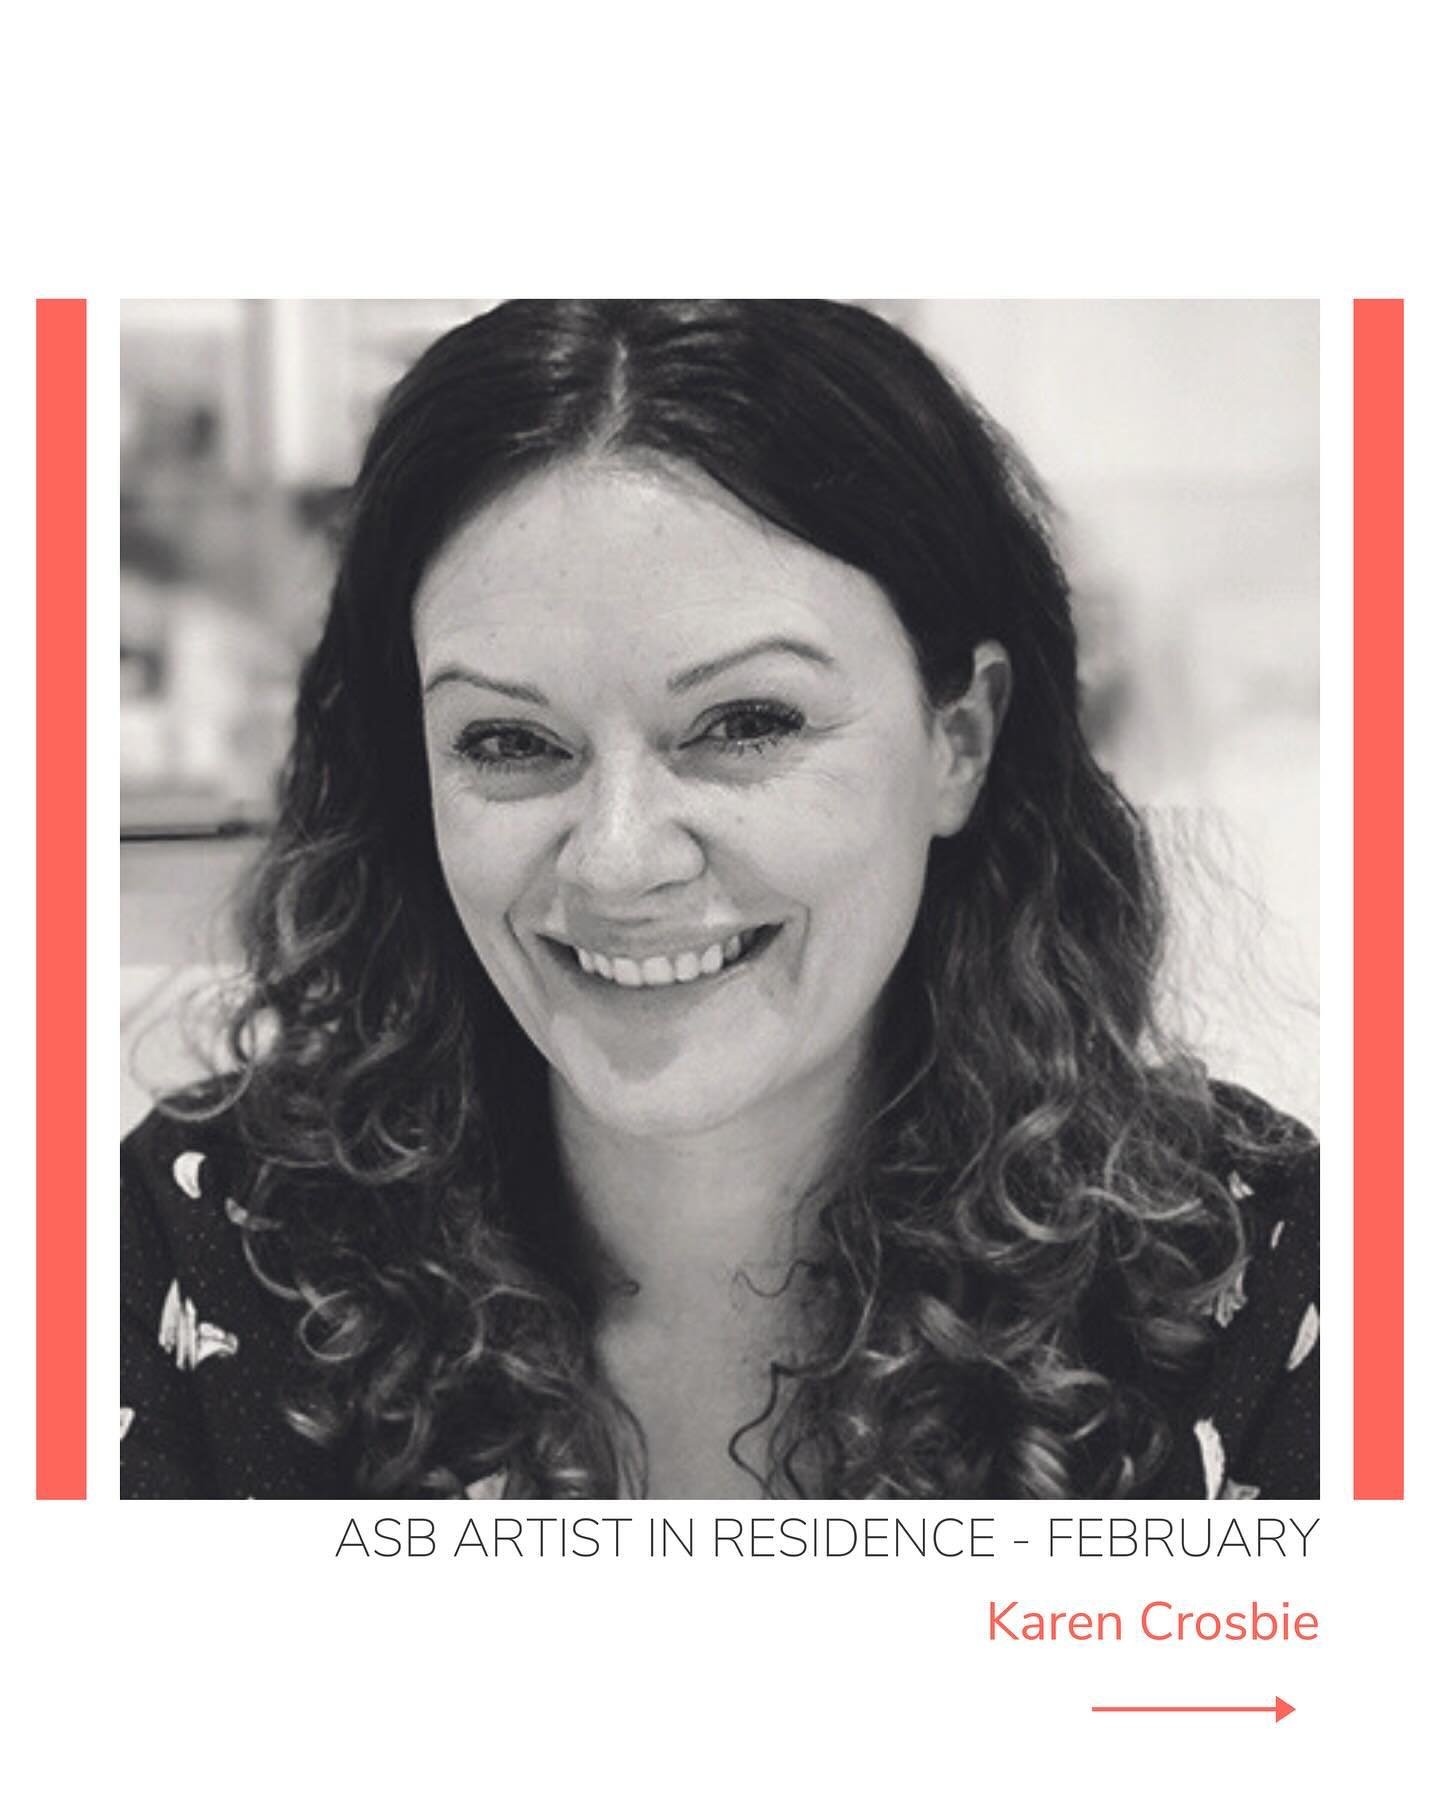 Proudly introducing our February 2024 Artist in Residence: Karen Crosbie @karencrosbieillustration.

Karen was one of our very first contributing artists when we had just launched ASB and has continued to be an ASB champion through the years 💛.

Cam